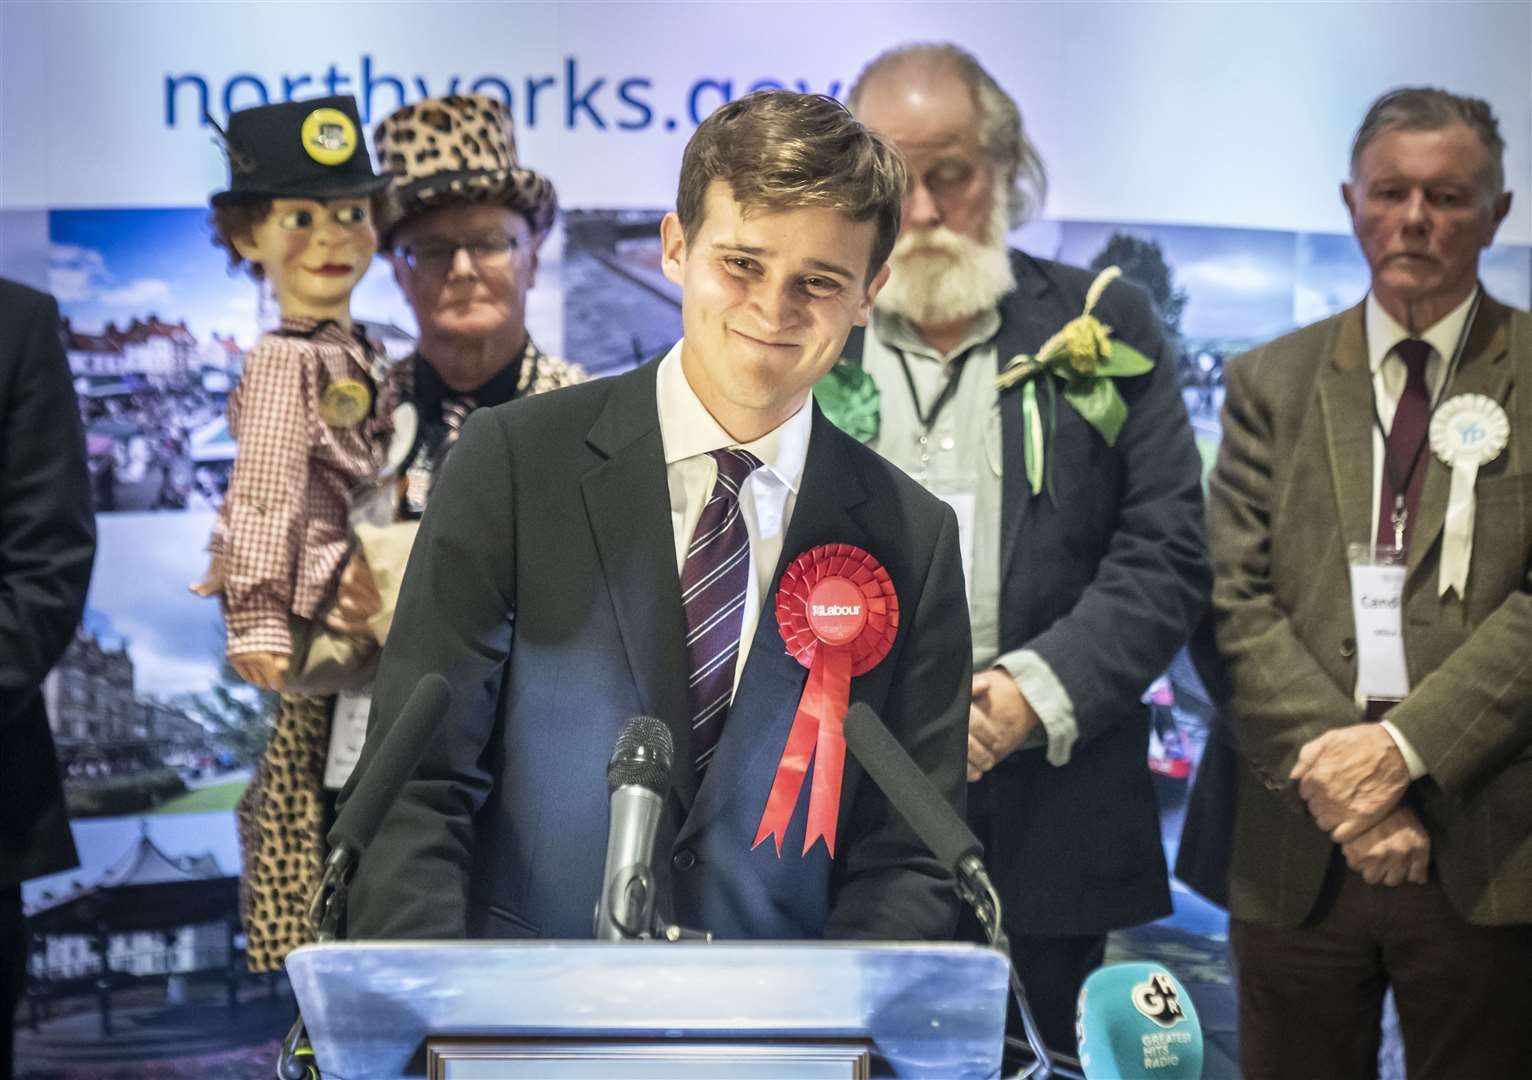 After the vote is counted, the winner is announced (Danny Lawson/PA)